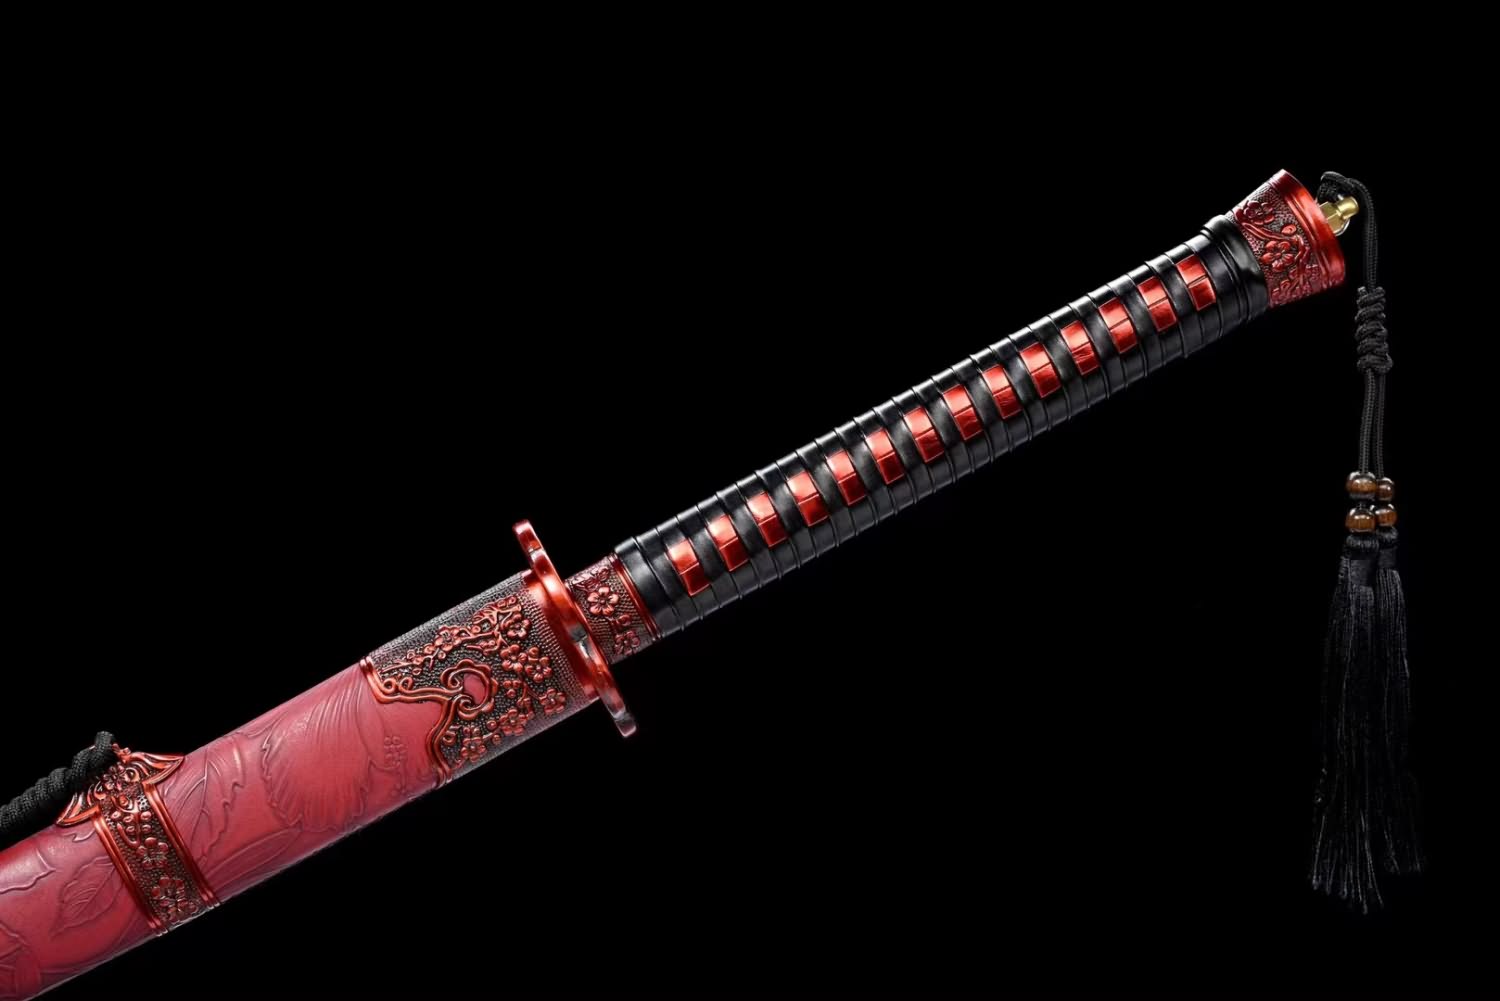 Qing dao Sword Real Forged High Carbon Steel Blade,Alloy Fittings,Red Scabbard